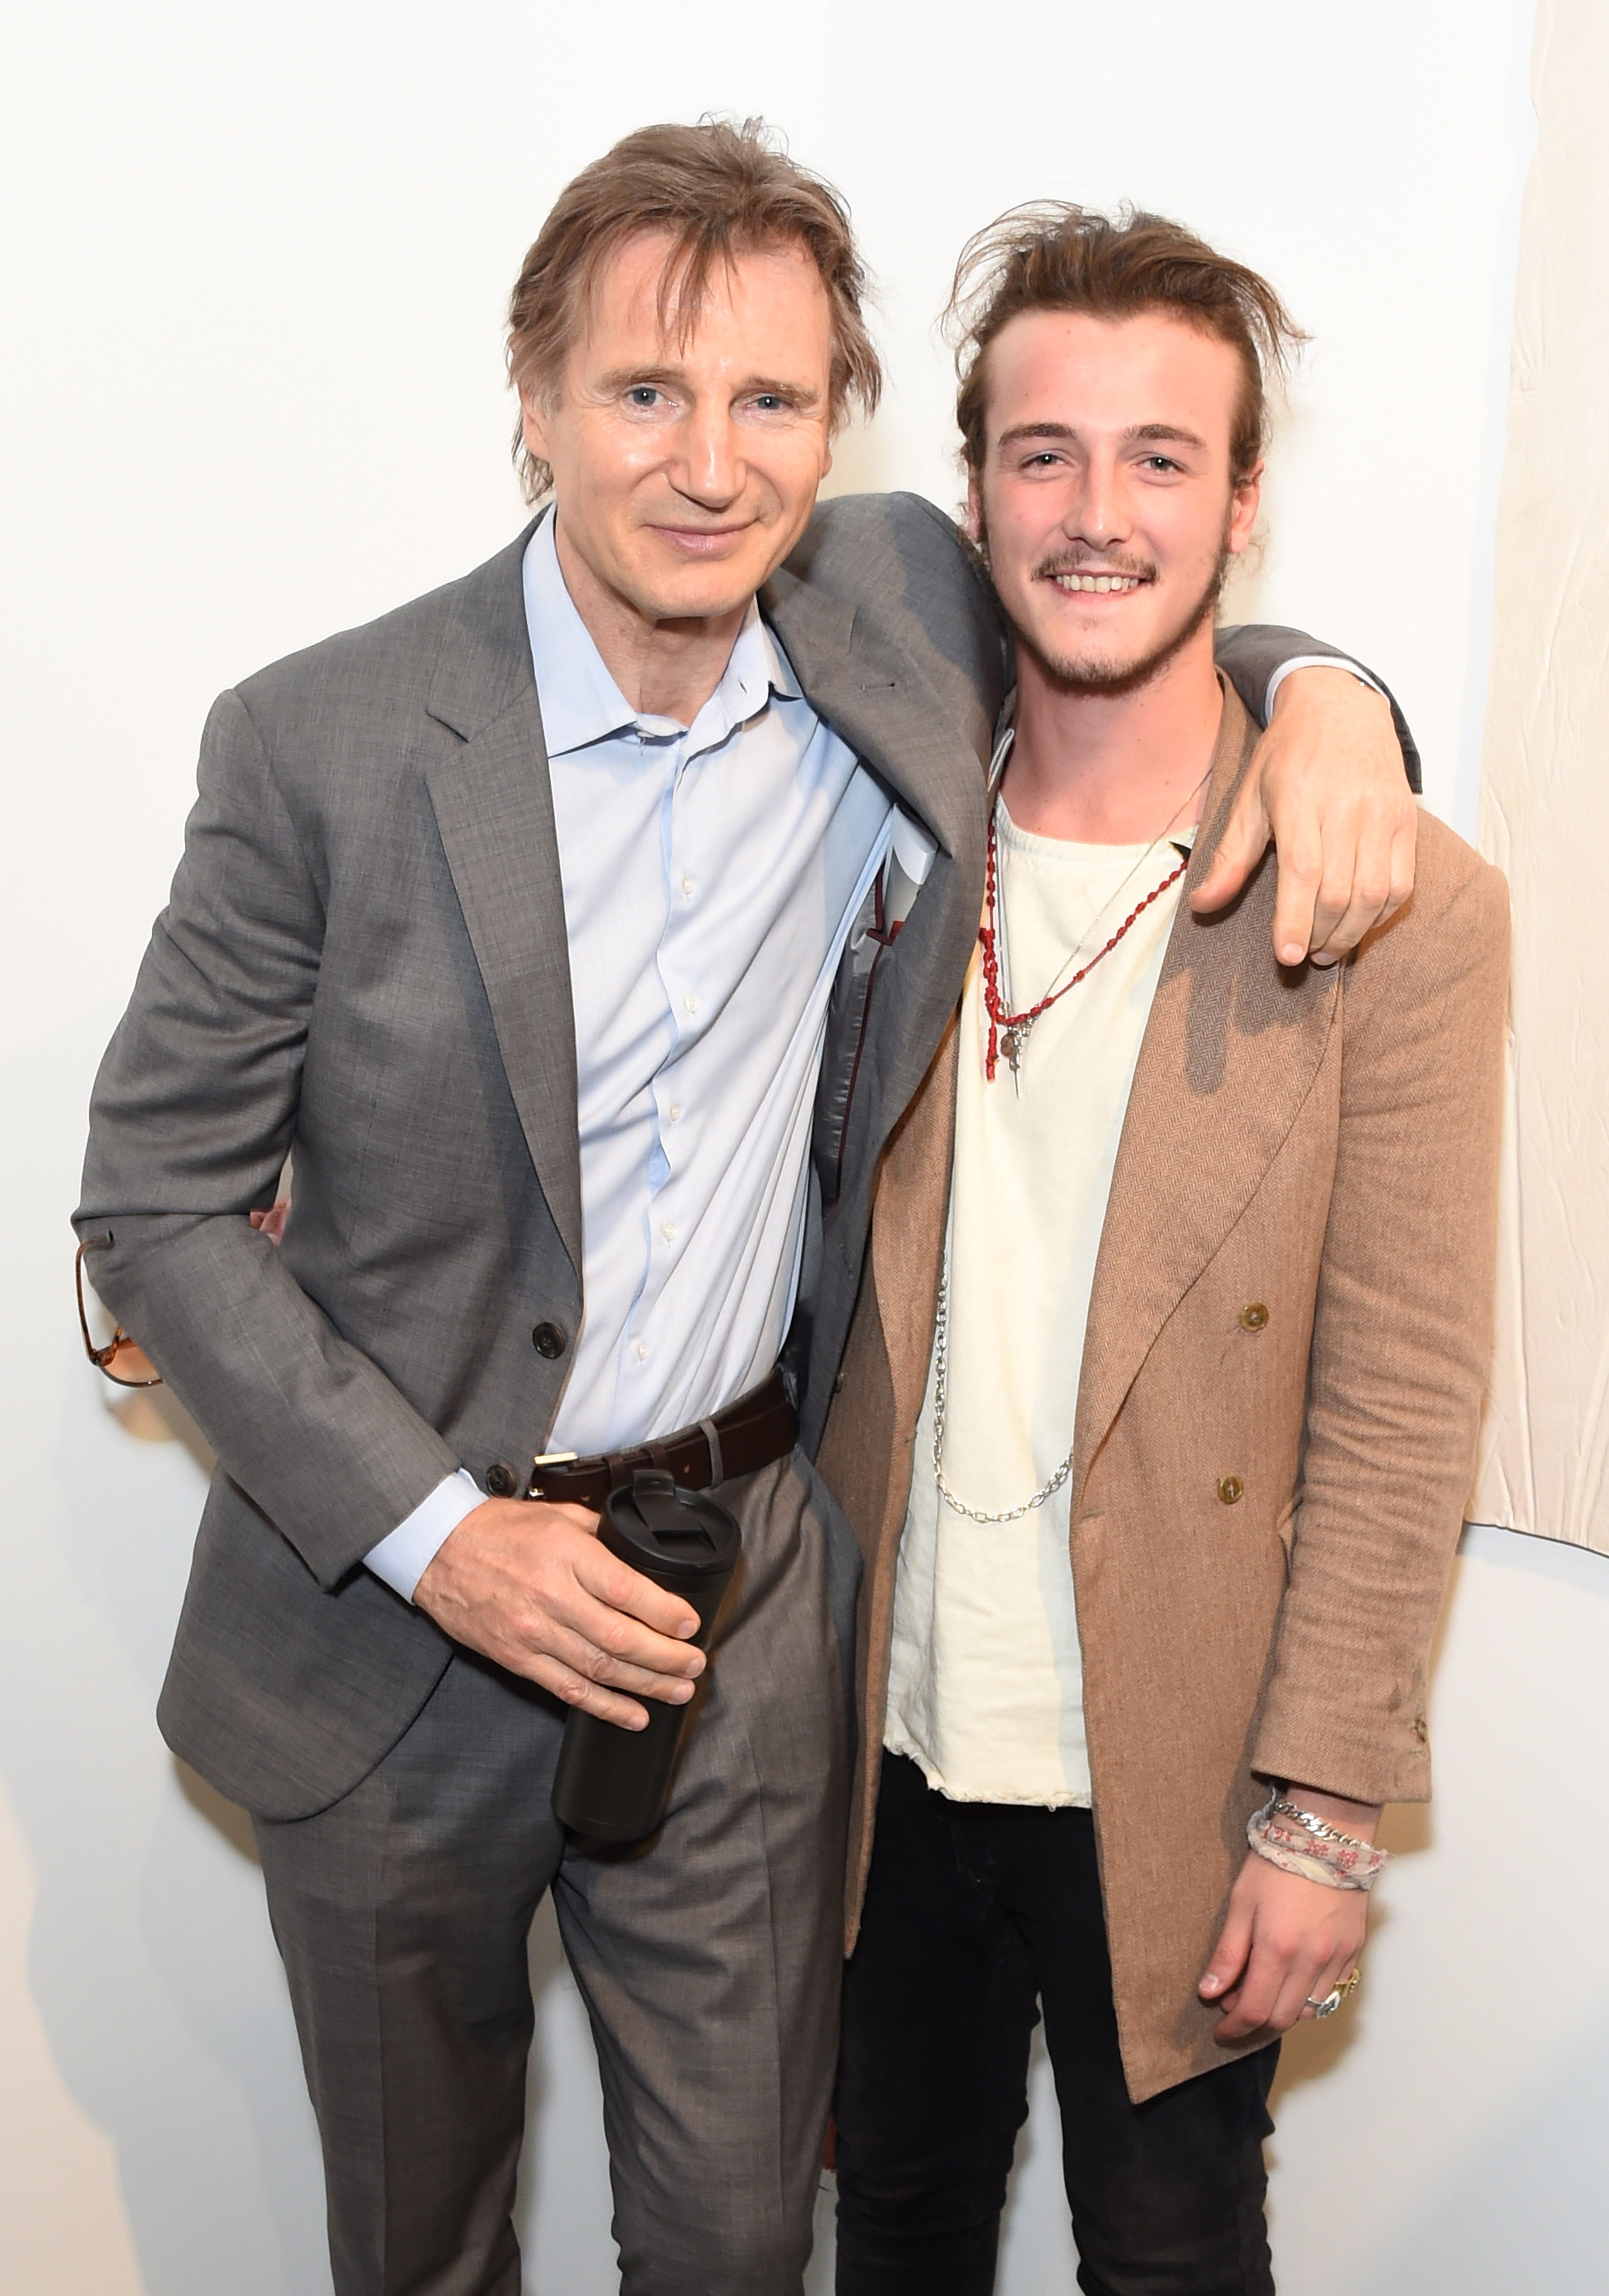 Liam Neeson (L ) and Michael Neeson attend the Maison Mais Non launch party as Micheal Neeson launches fashion gallery in Soho on June 2, 2015 in London, England. | Source: Getty Images